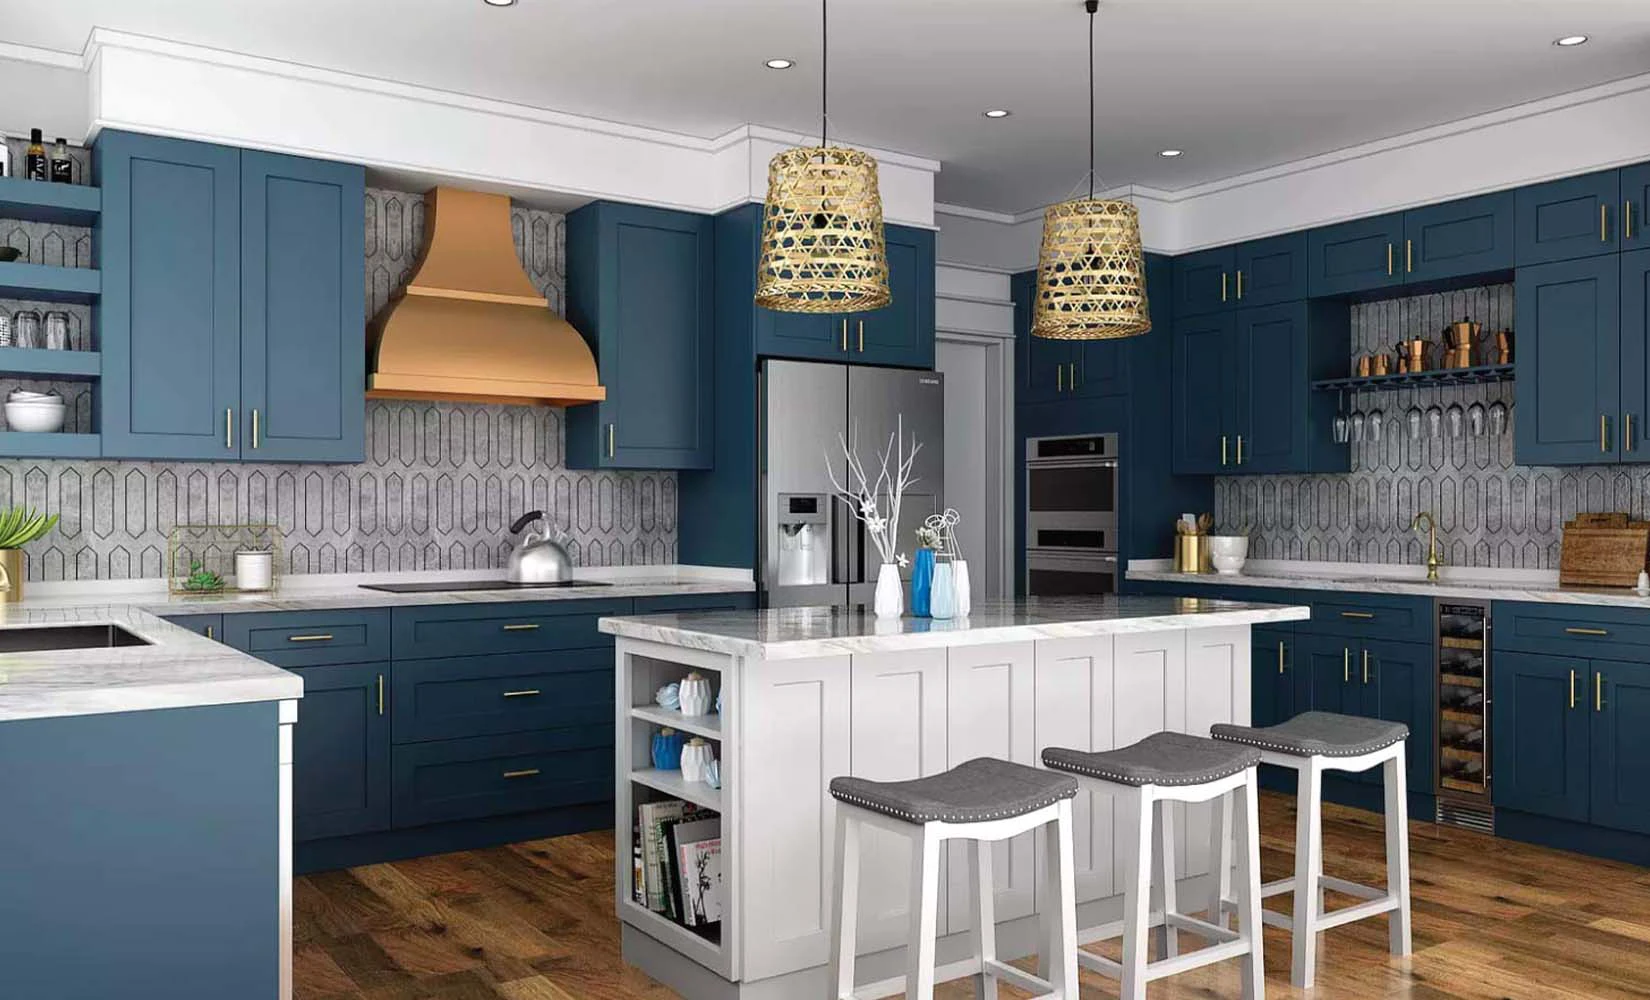 Kitchen with imperial blue cabinets from Kitchen Cabinet Kings.